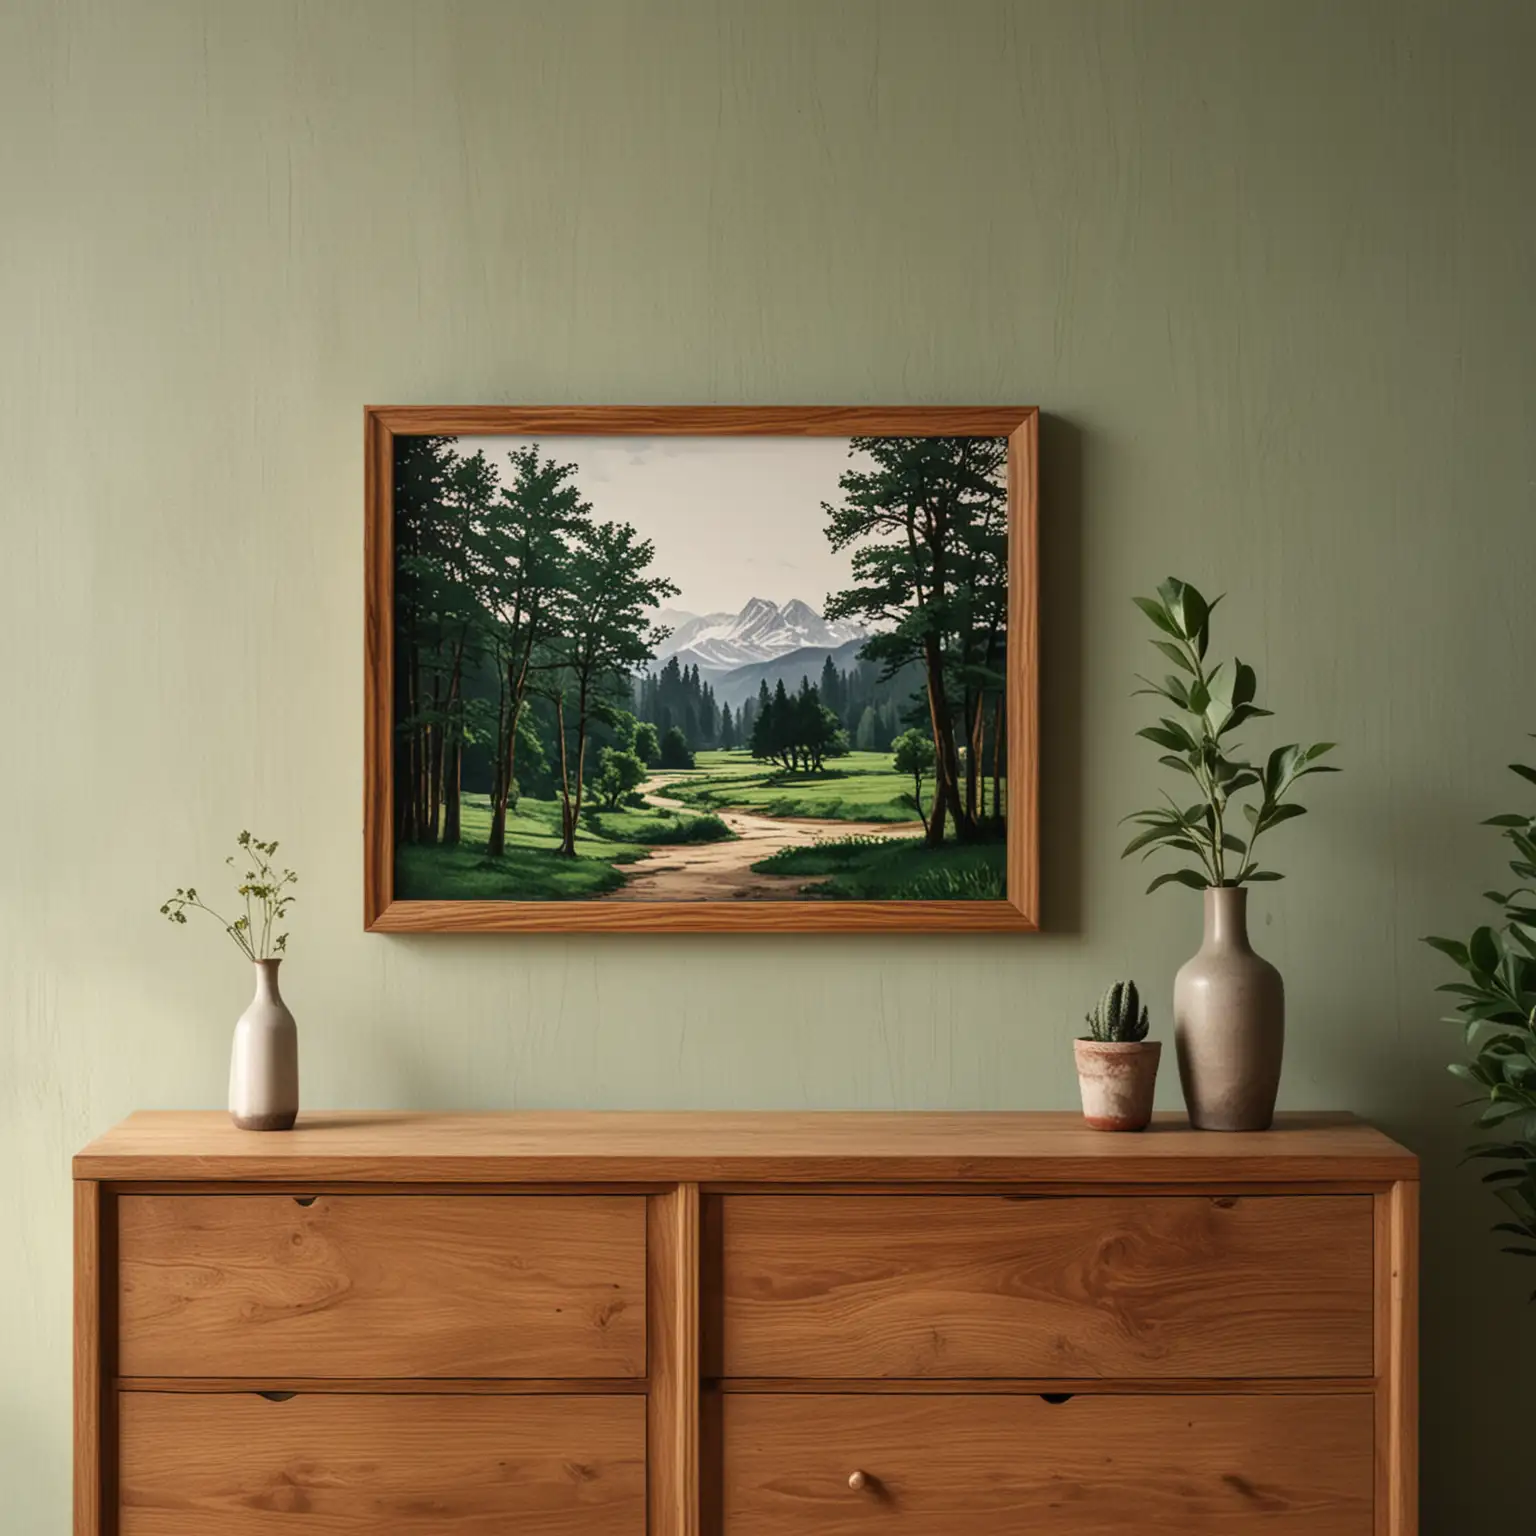 generate a photo about an art piece in a frame (the art is with passpartout, in landscape format)  on a dresser next to a window. the wall is dark green